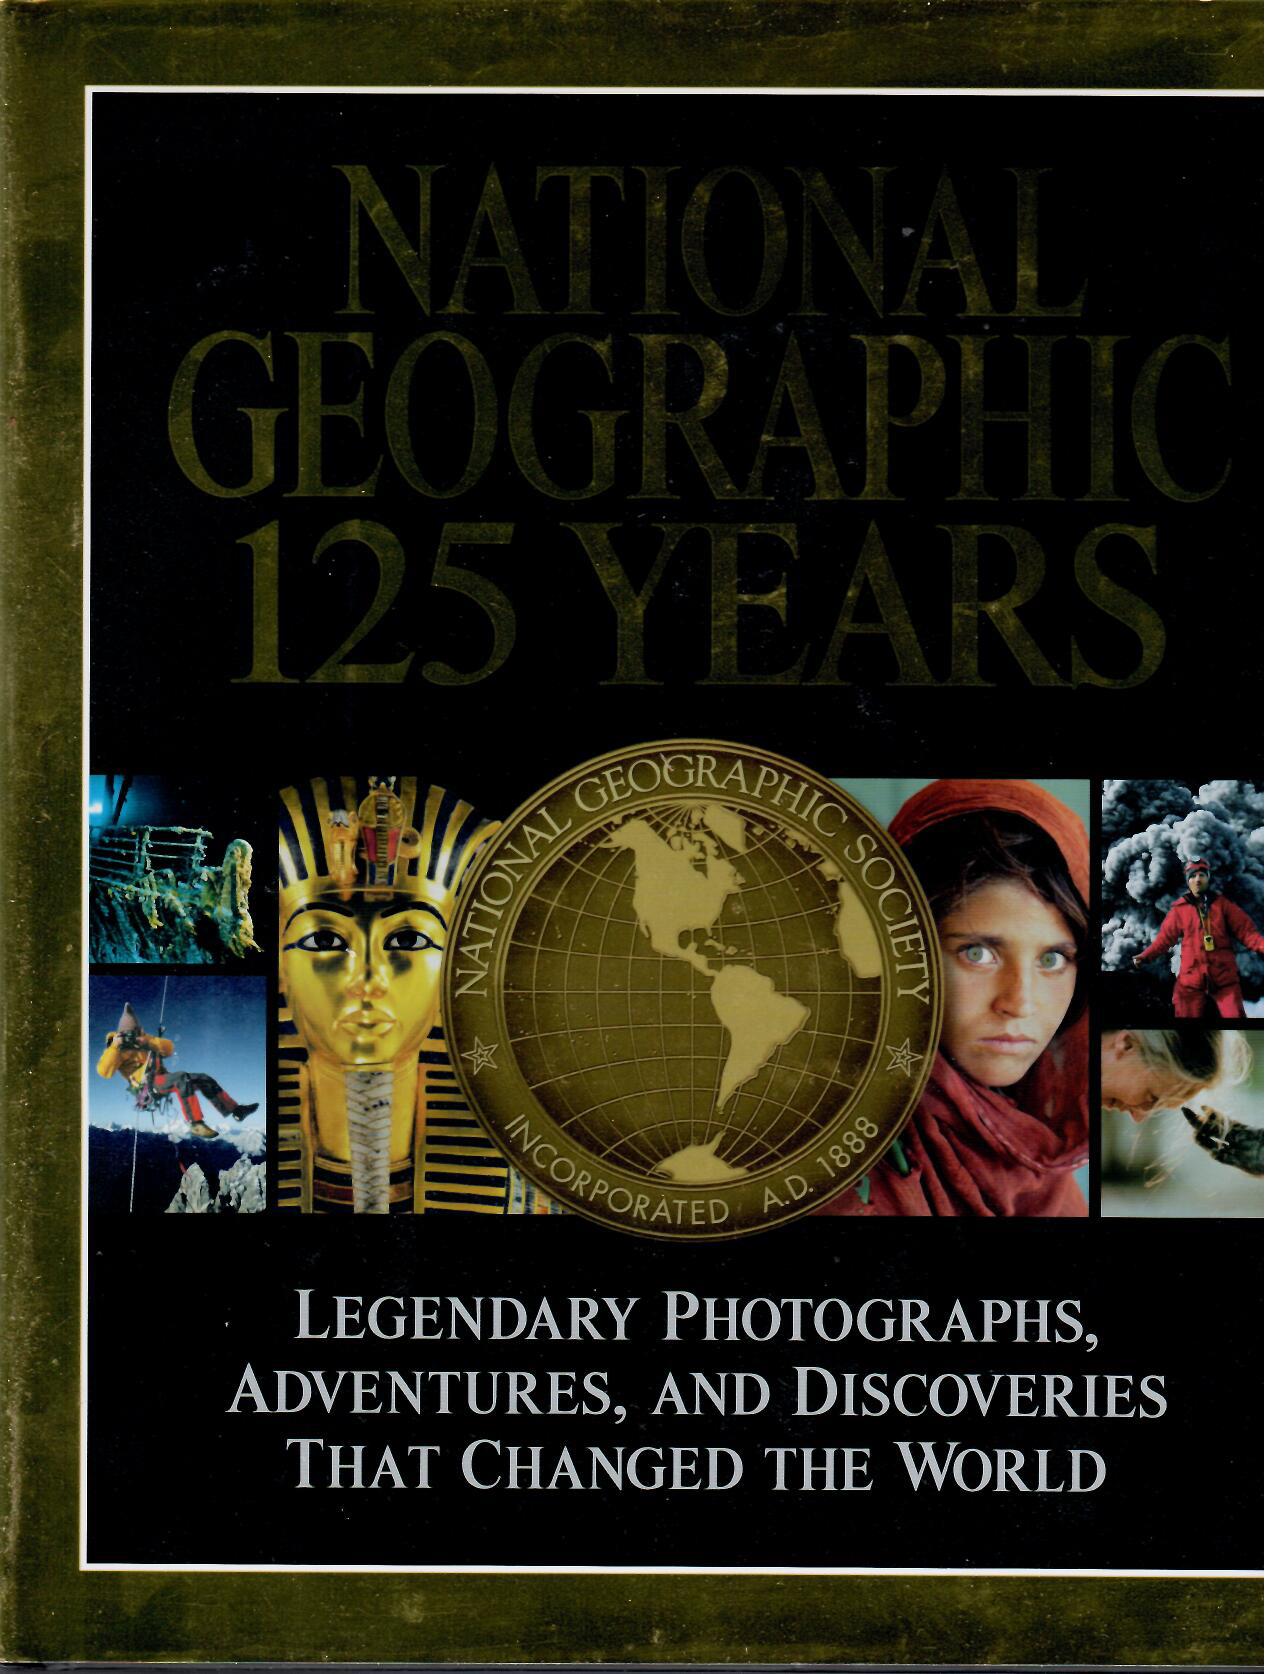 National Geographic 125 Years. Legendary Photographs, Adventures, and Discoveries that changed The World